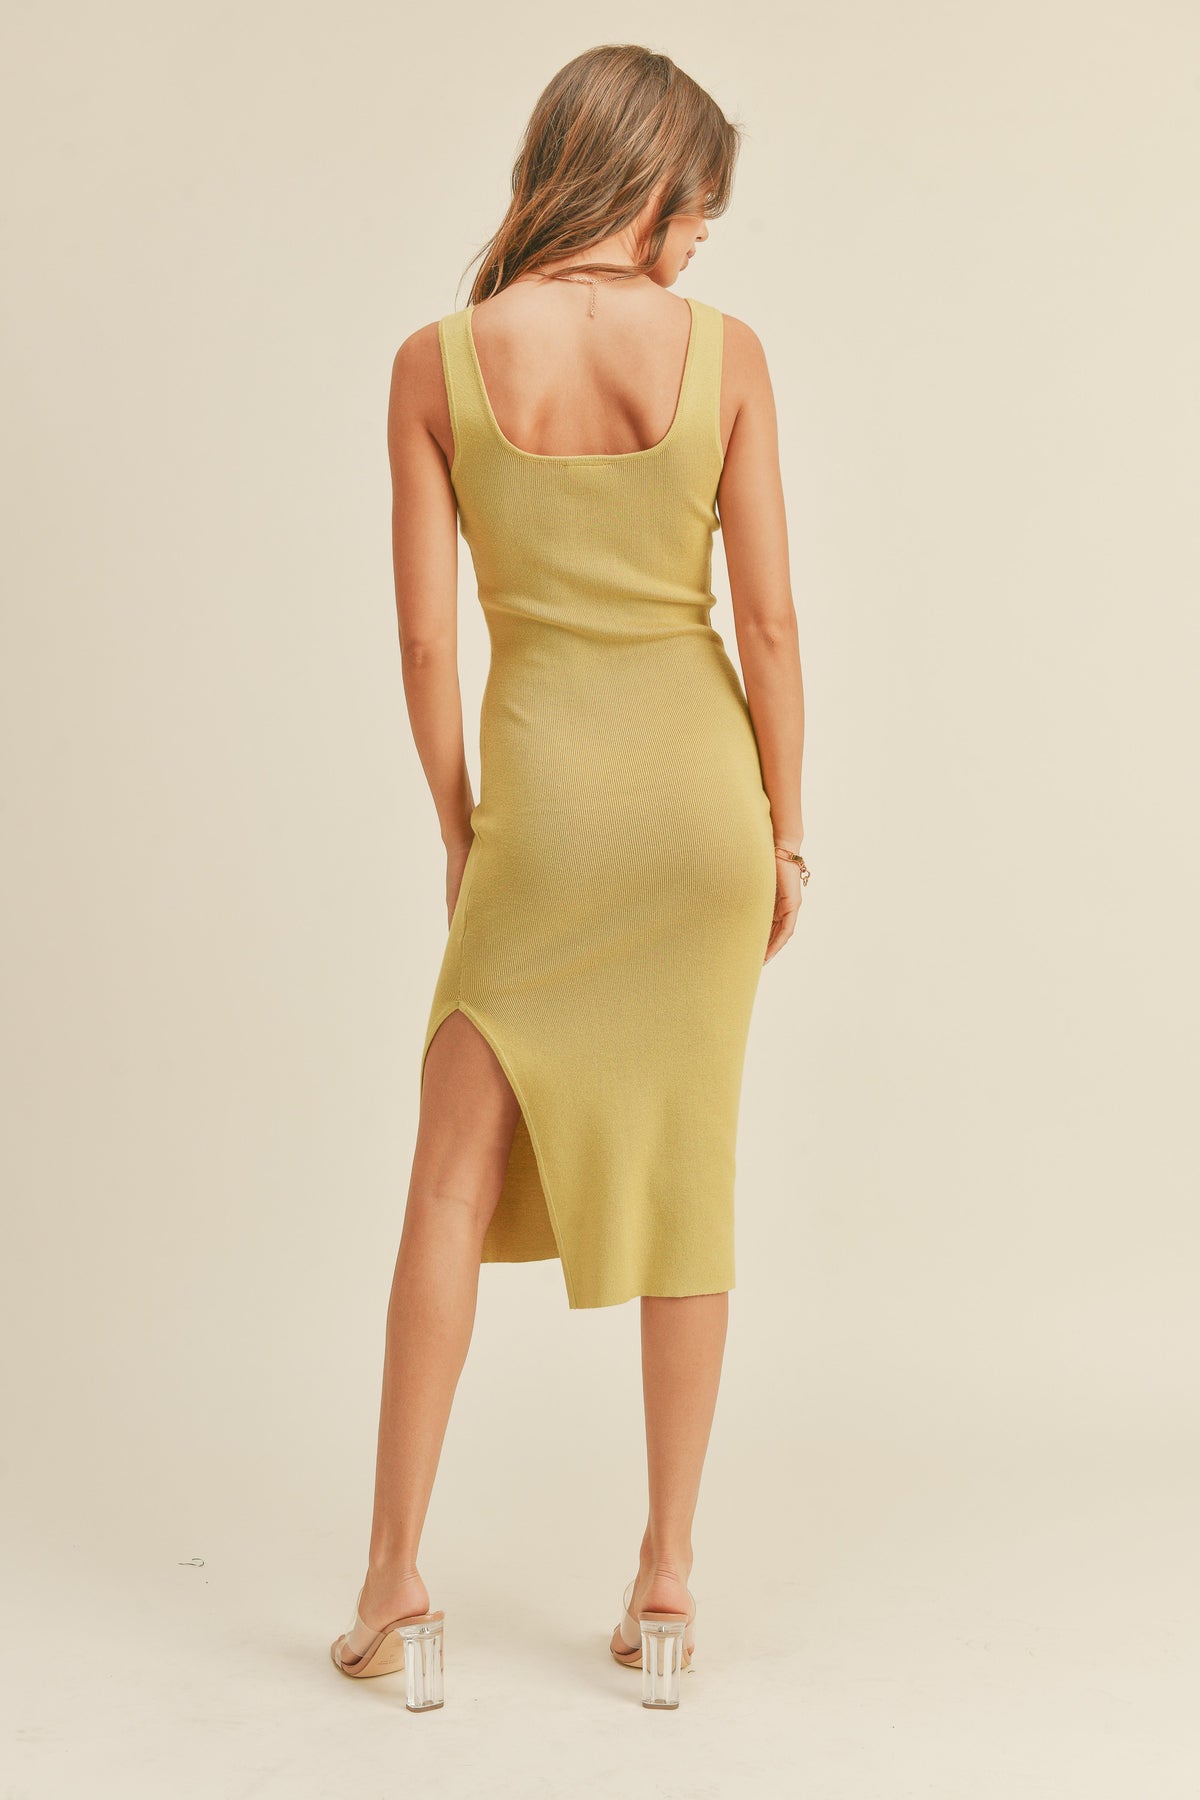 Miou Muse - Square Neck Knit Fitted Slit Dress - MMD441 | SaltTree